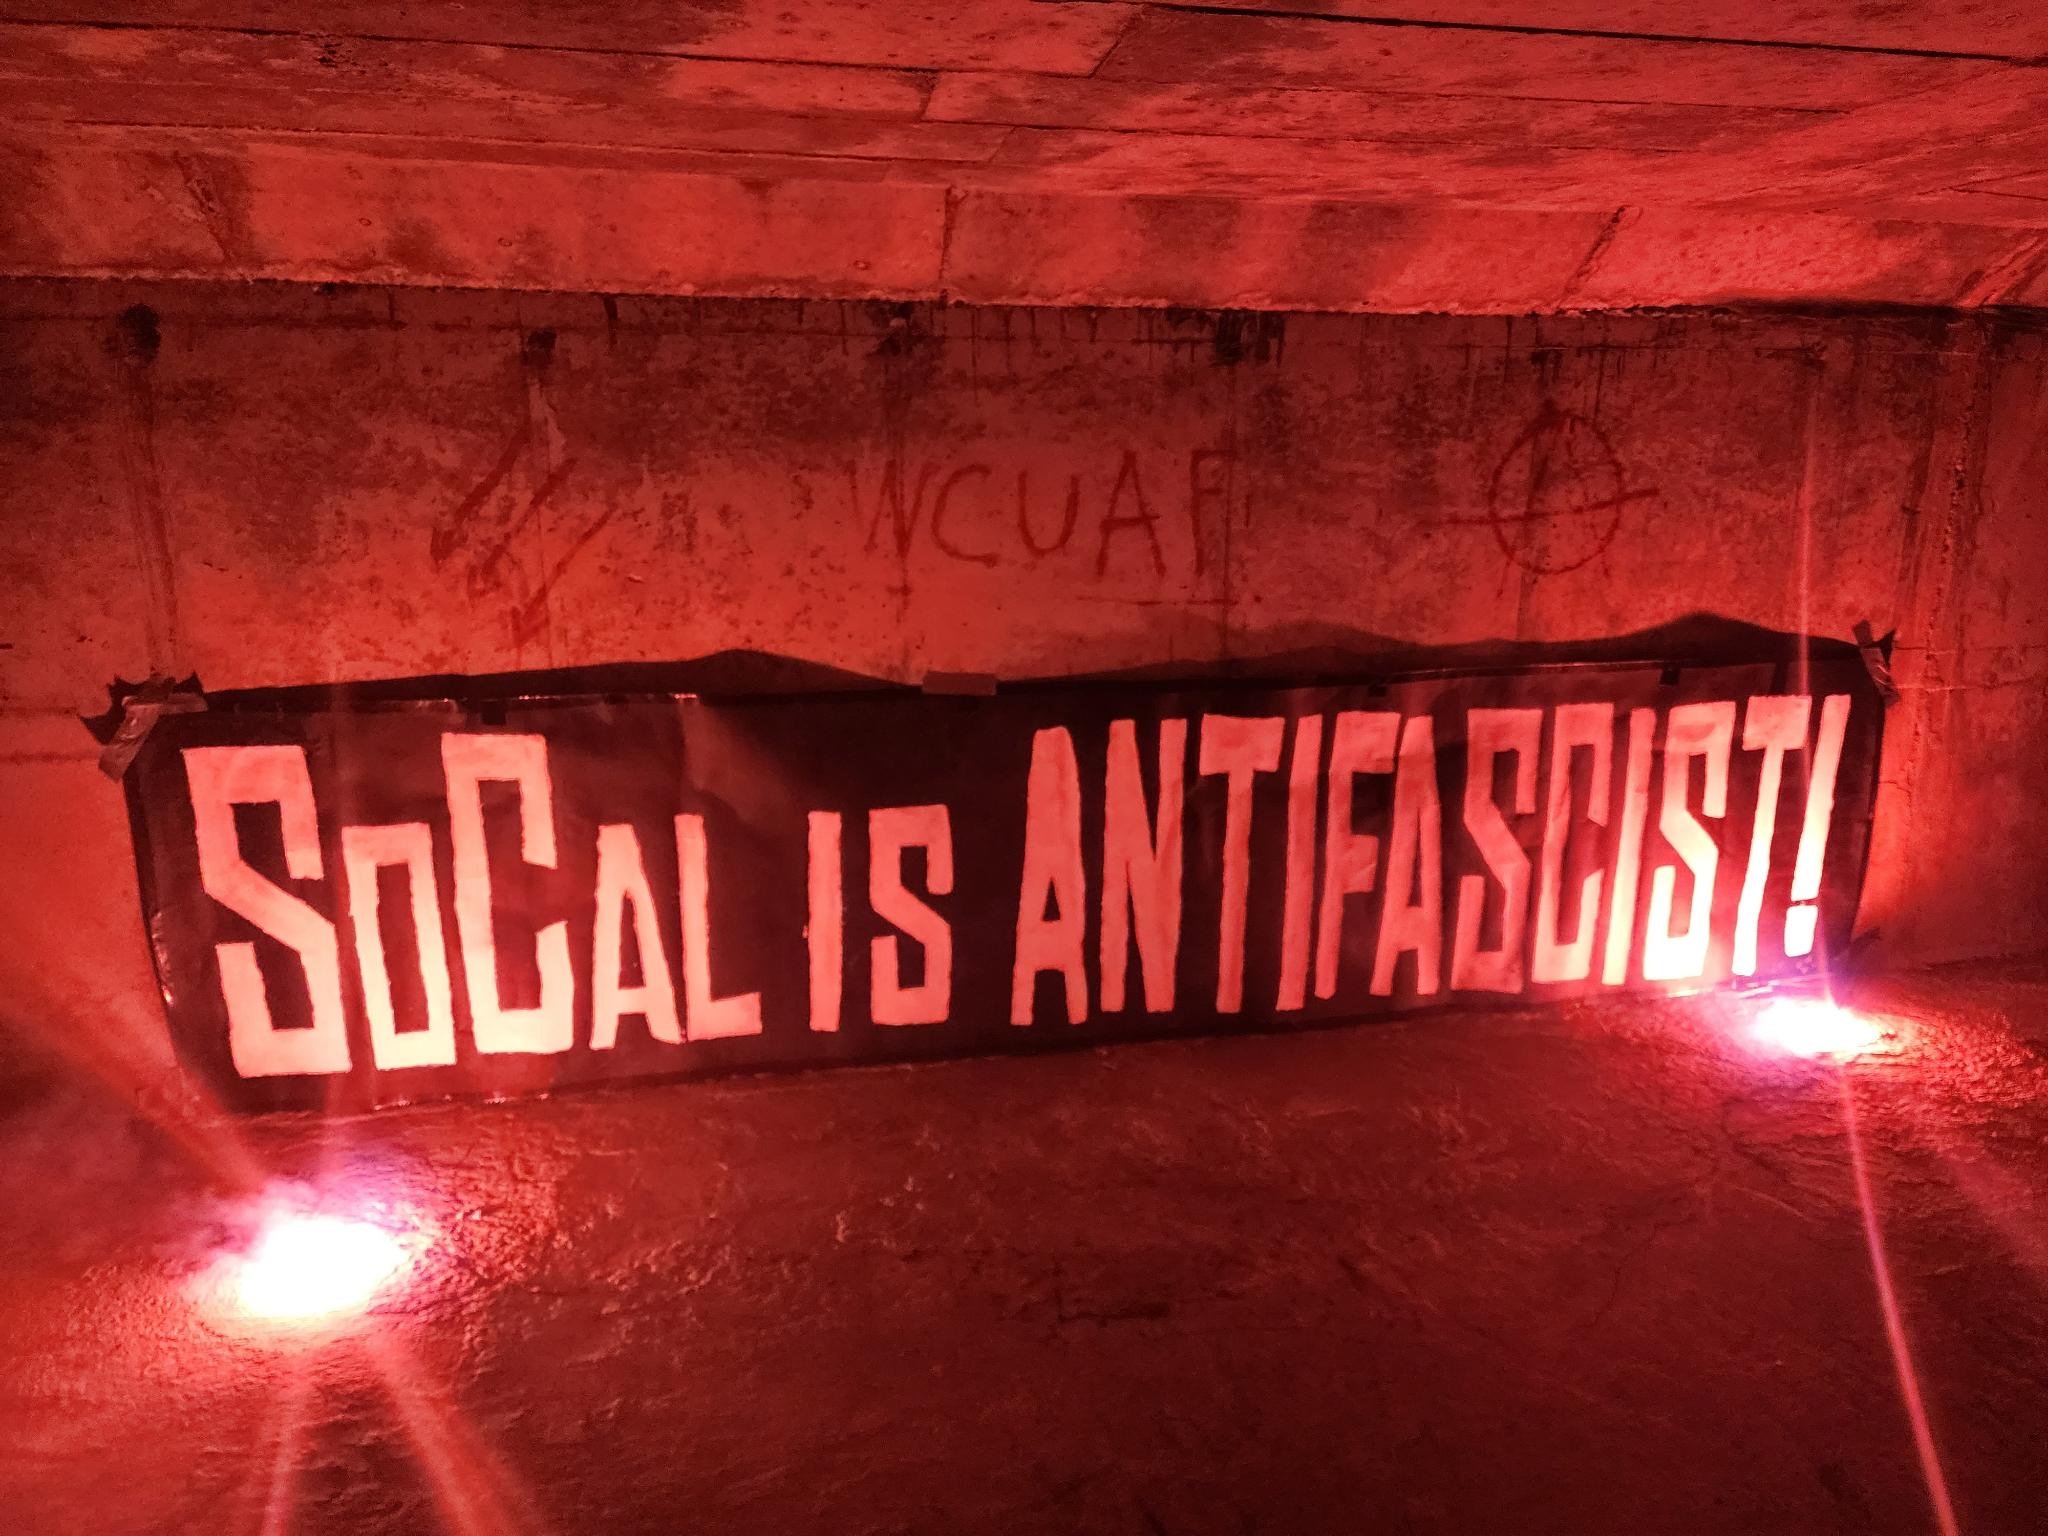 A black banner with white text that reads "SoCal is ANTIFASCIST!" with road flares on either side. Its placed against what appears to be a concrete wall in a dark tunnel. The wall has three arrows, the letters W.C.U.A.F. and an anarchist circle-a behind it.